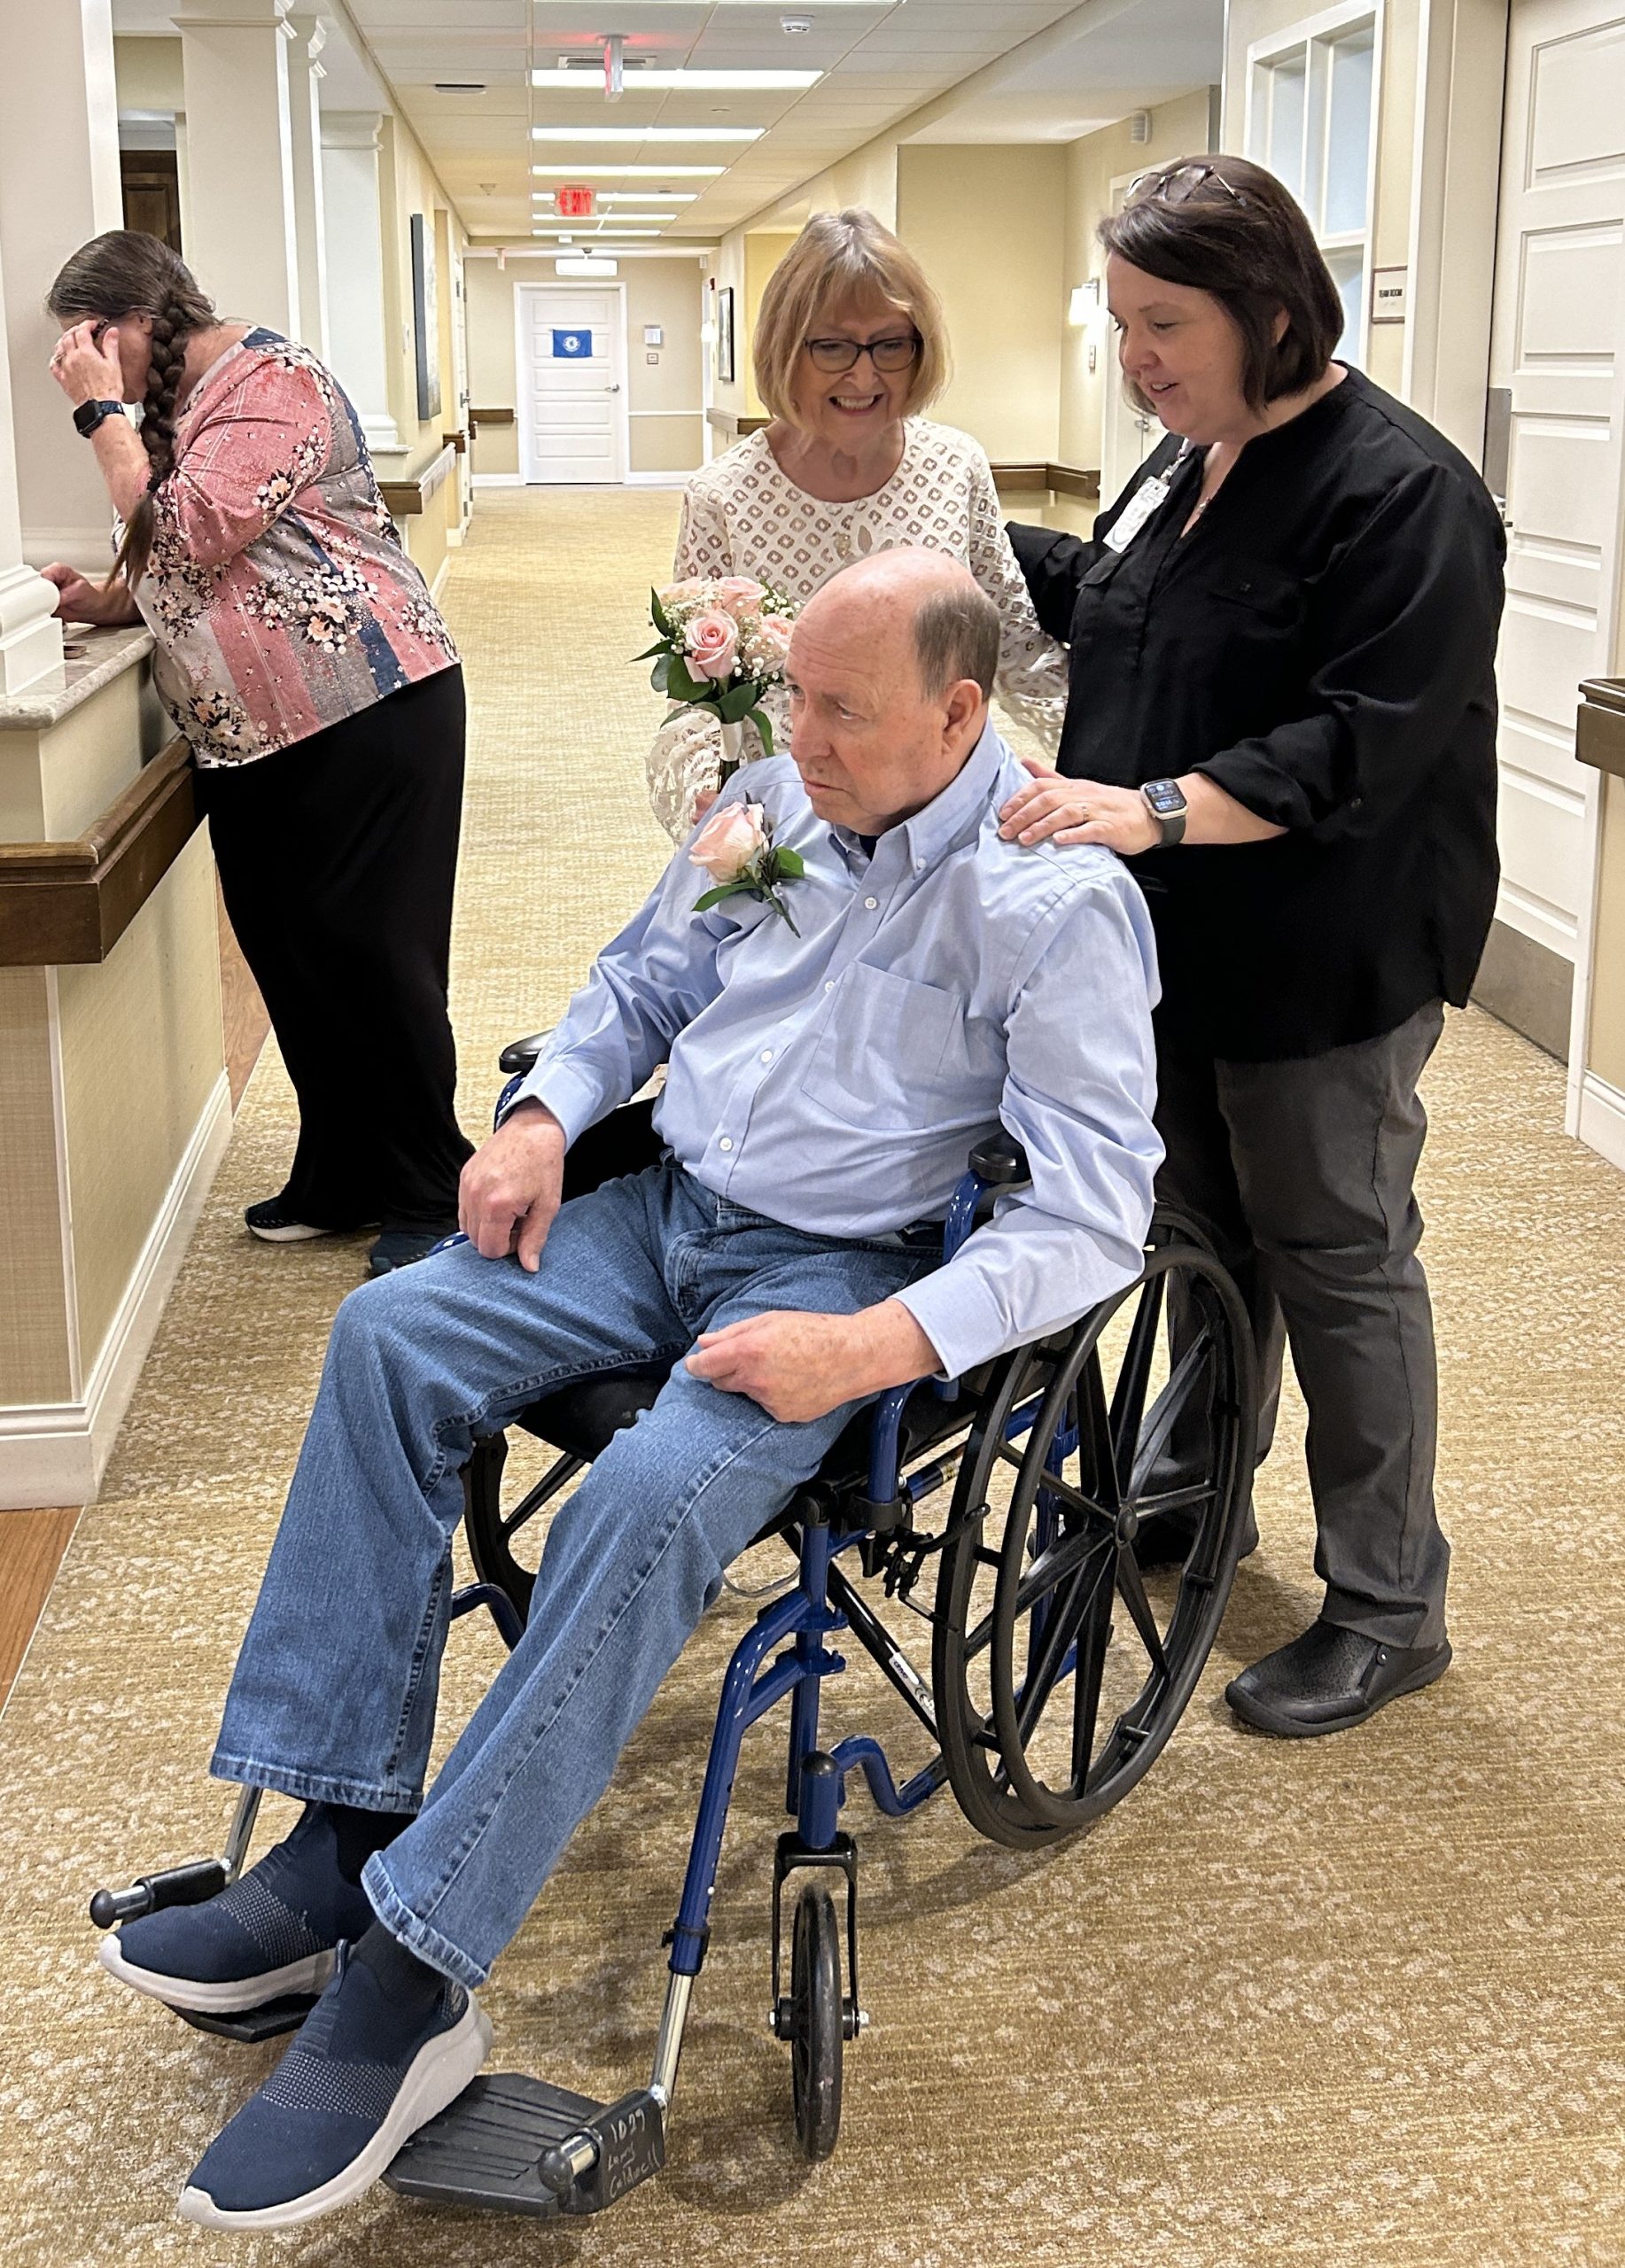 senior woman in white dress with bouquet stands beside man in wheelchair and beside dark-haired woman with her hand on his shoulder